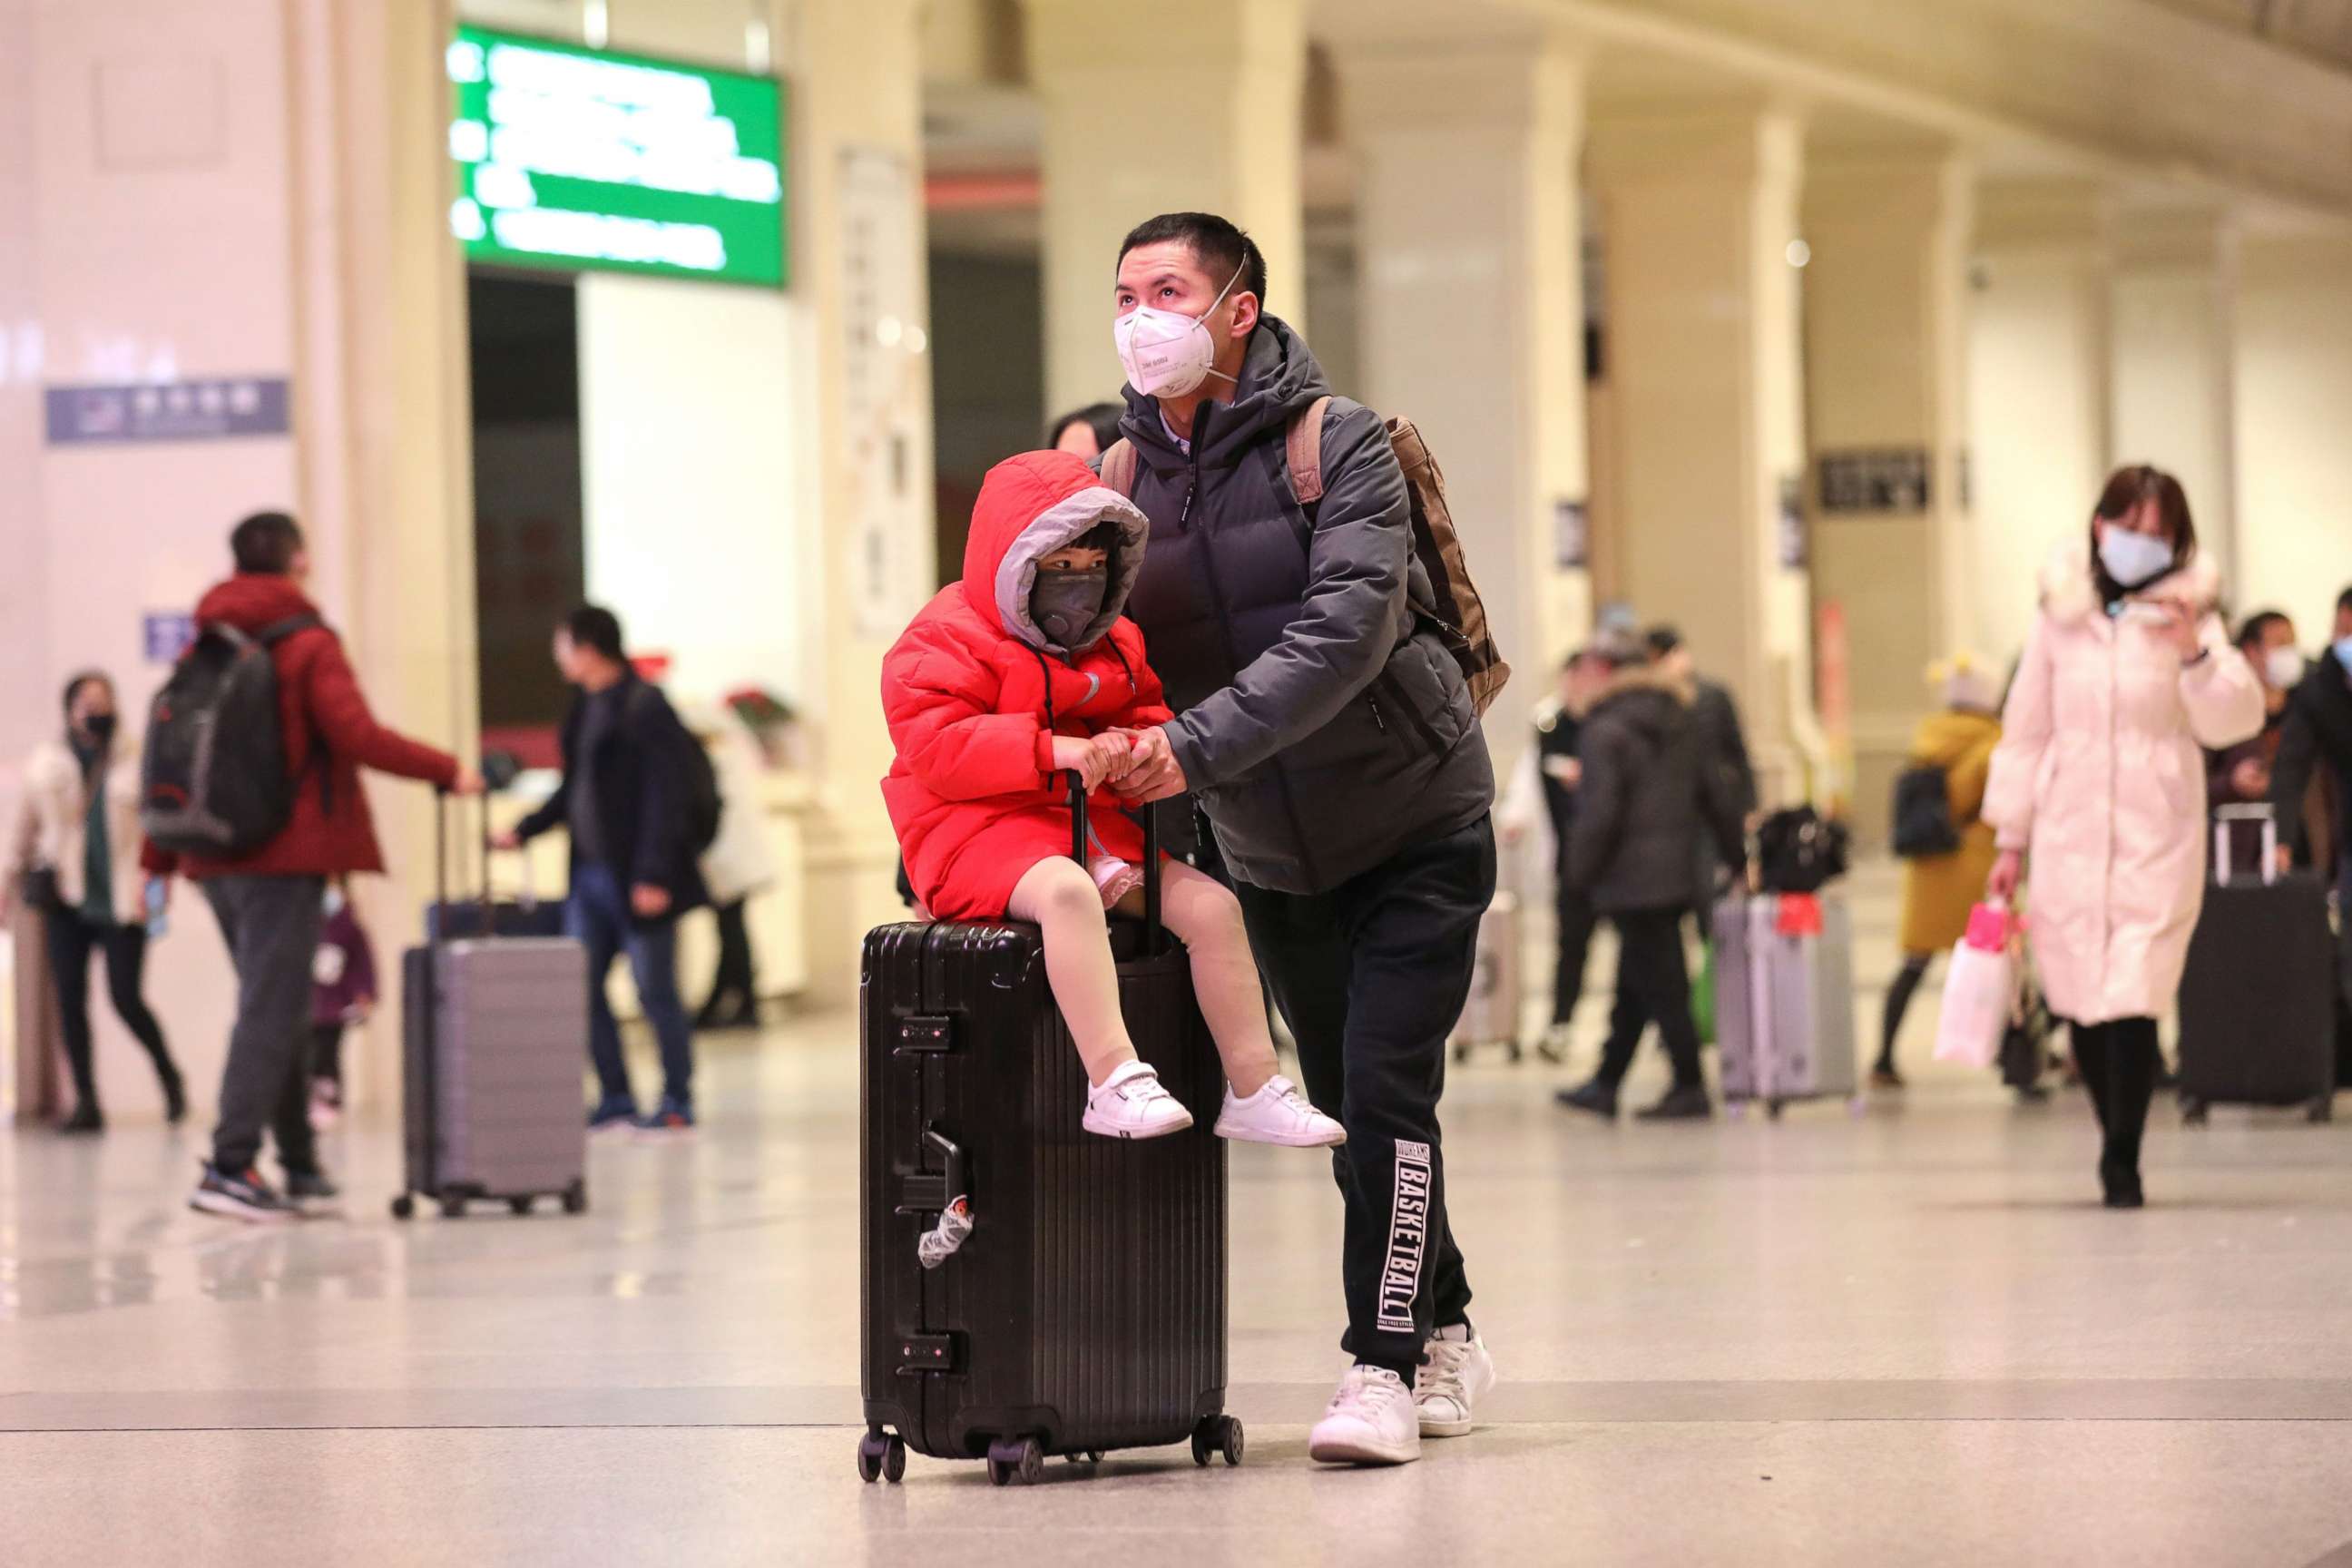 PHOTO: Commuters wearing face masks walk in a railway station in Wuhan, in China's central Hubei province, Jan. 21, 2020. Countries in Asia have ramped up measures to block the spread of a new virus as the death toll in China rose to six.